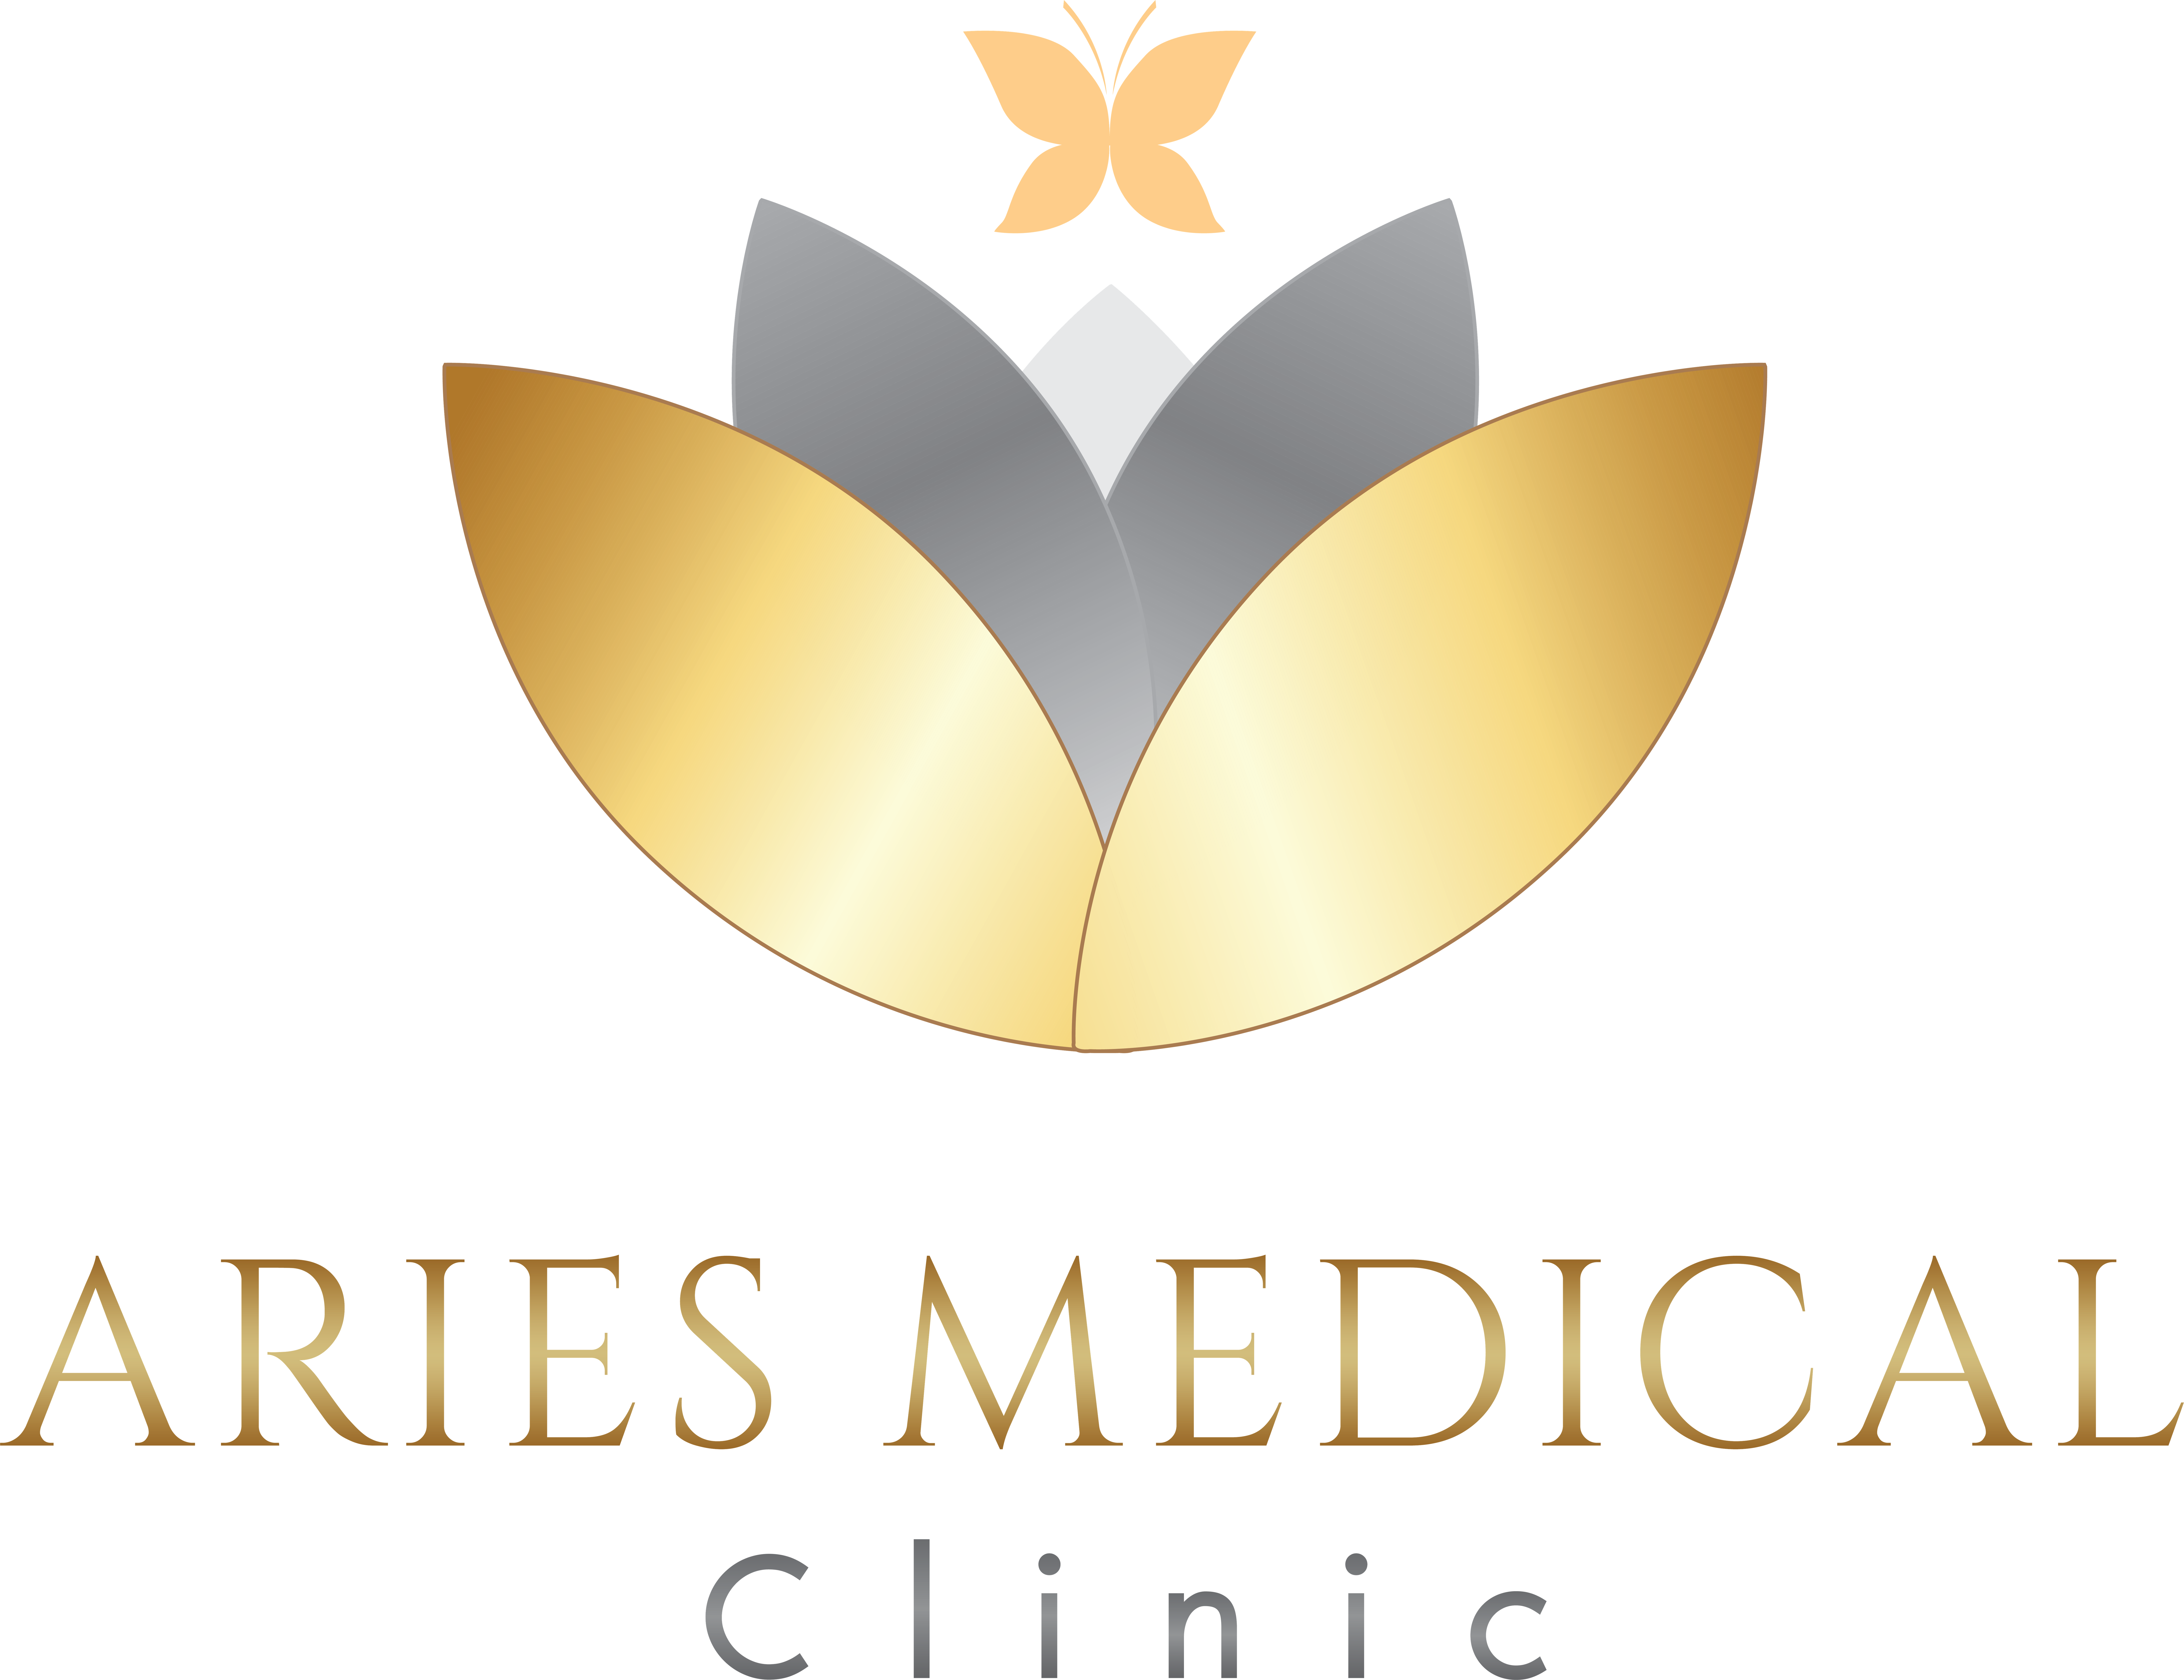 Aries Medical Clinic